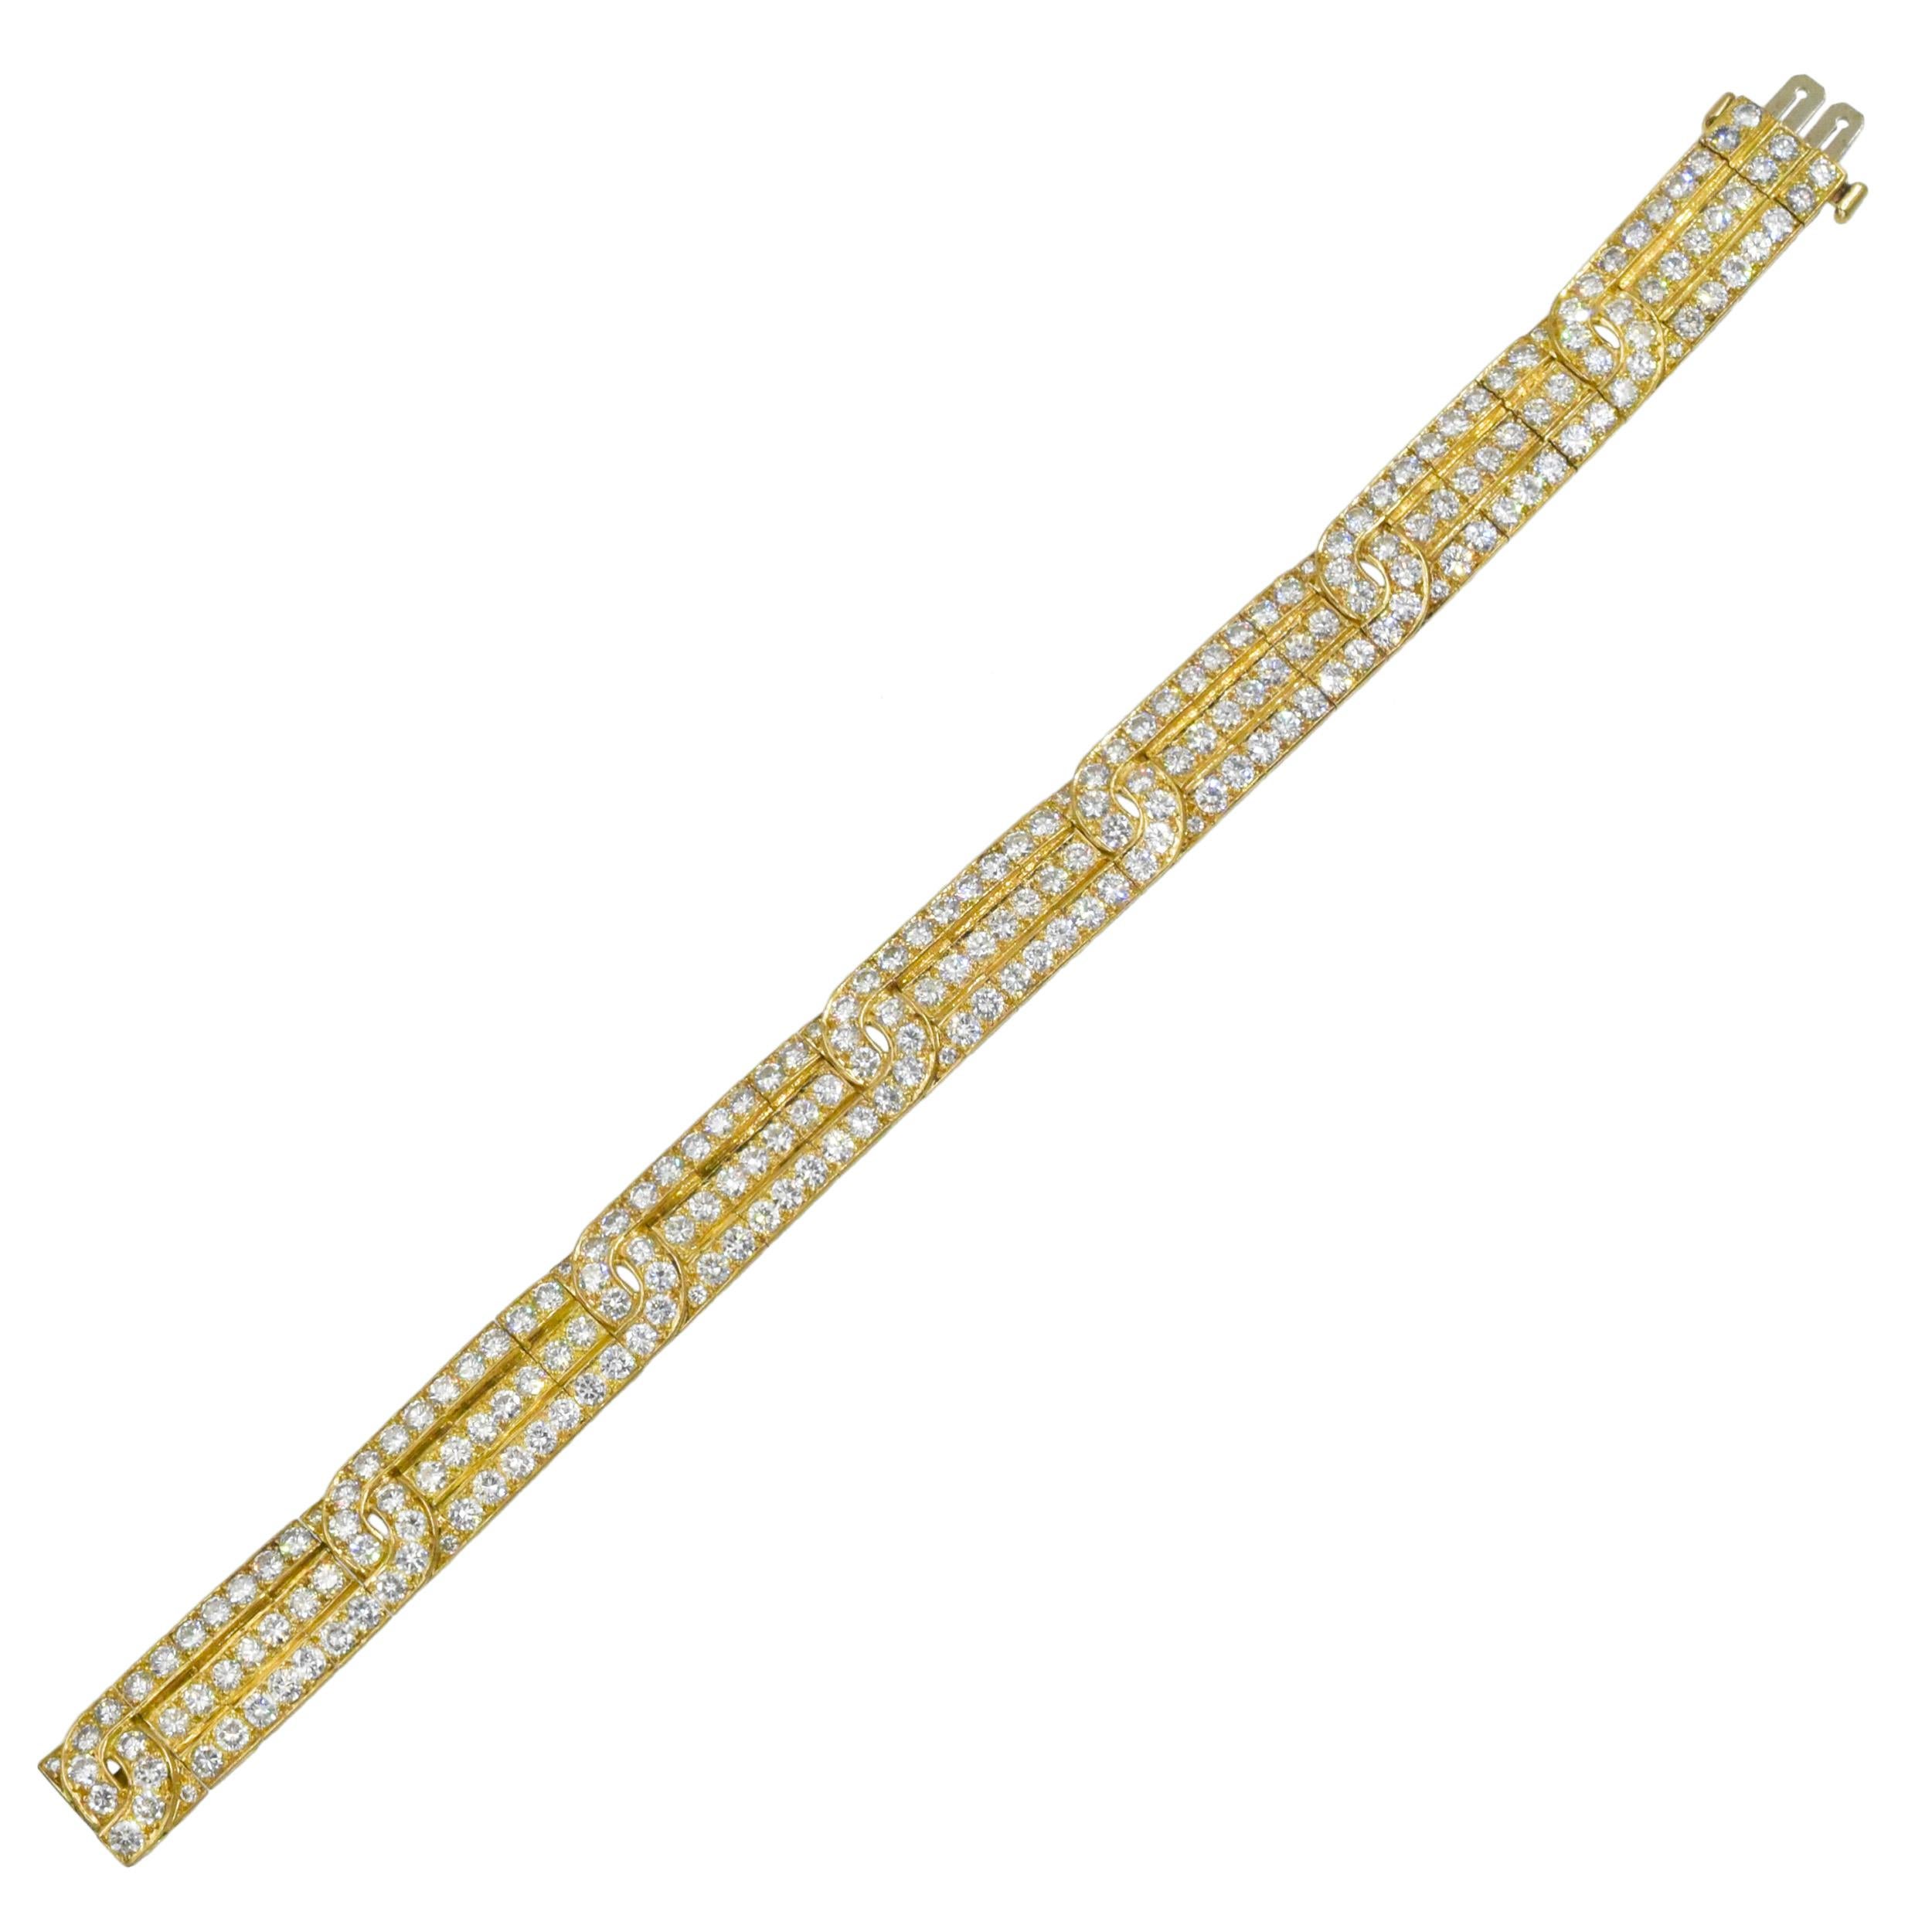 Van Cleef & Arpels Diamond and Gold Bracelet This bracelet is composed of three intertwined lines of
217 round diamonds weighing a total of approximately 12 carats (Color: F-G, Clarity: VS) all set in 18k yellow gold.
 Signed VCA Made In France,